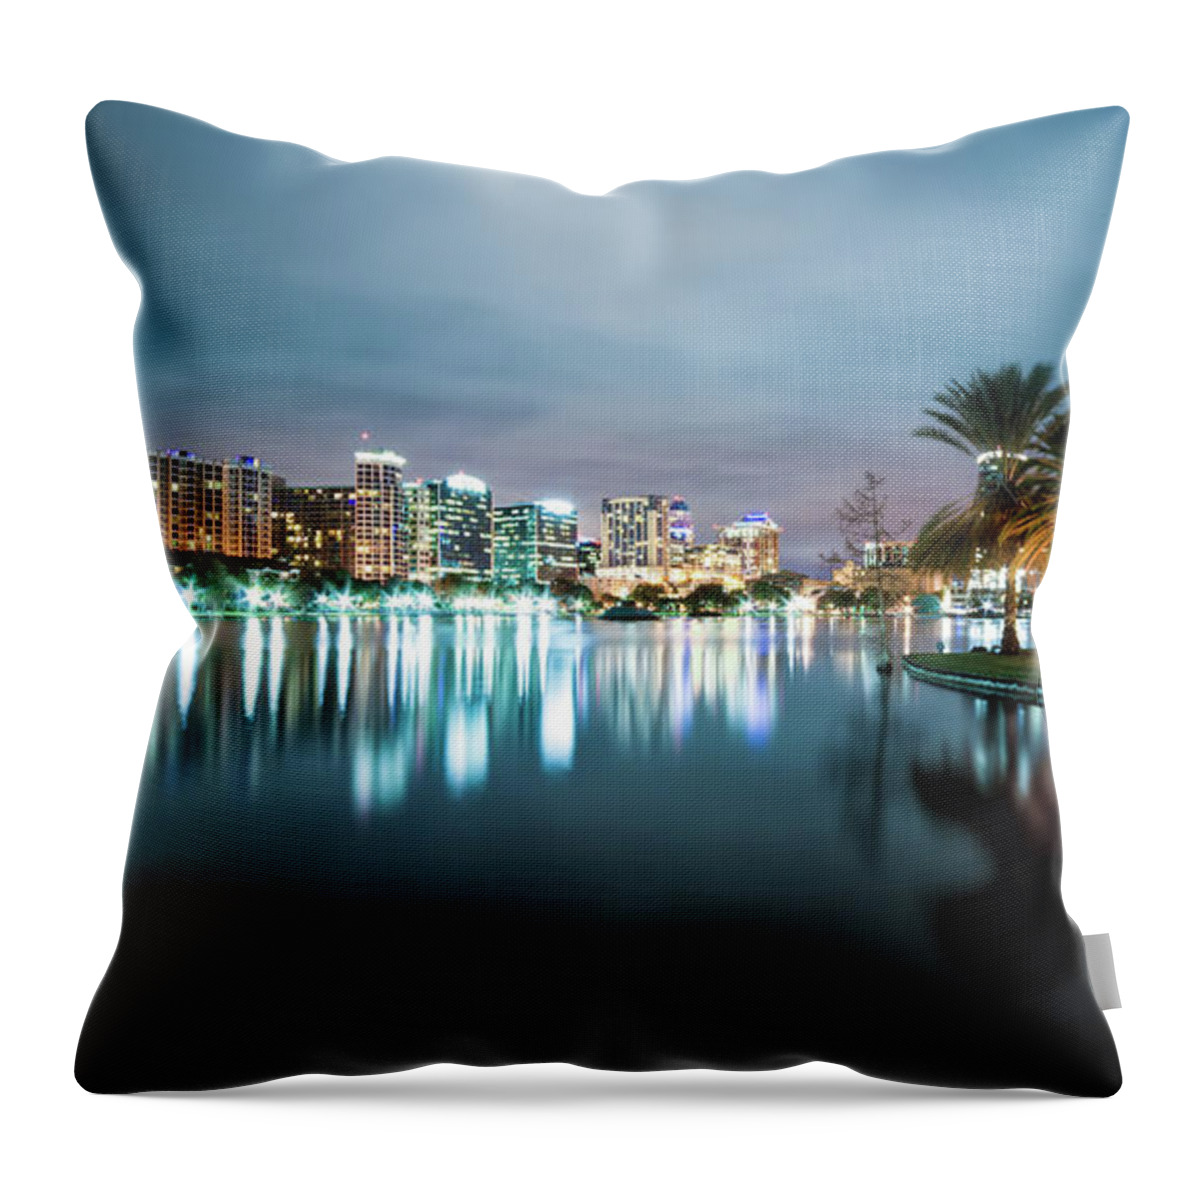 Outdoors Throw Pillow featuring the photograph Orlando Night Cityscape by Sky Noir Photography By Bill Dickinson